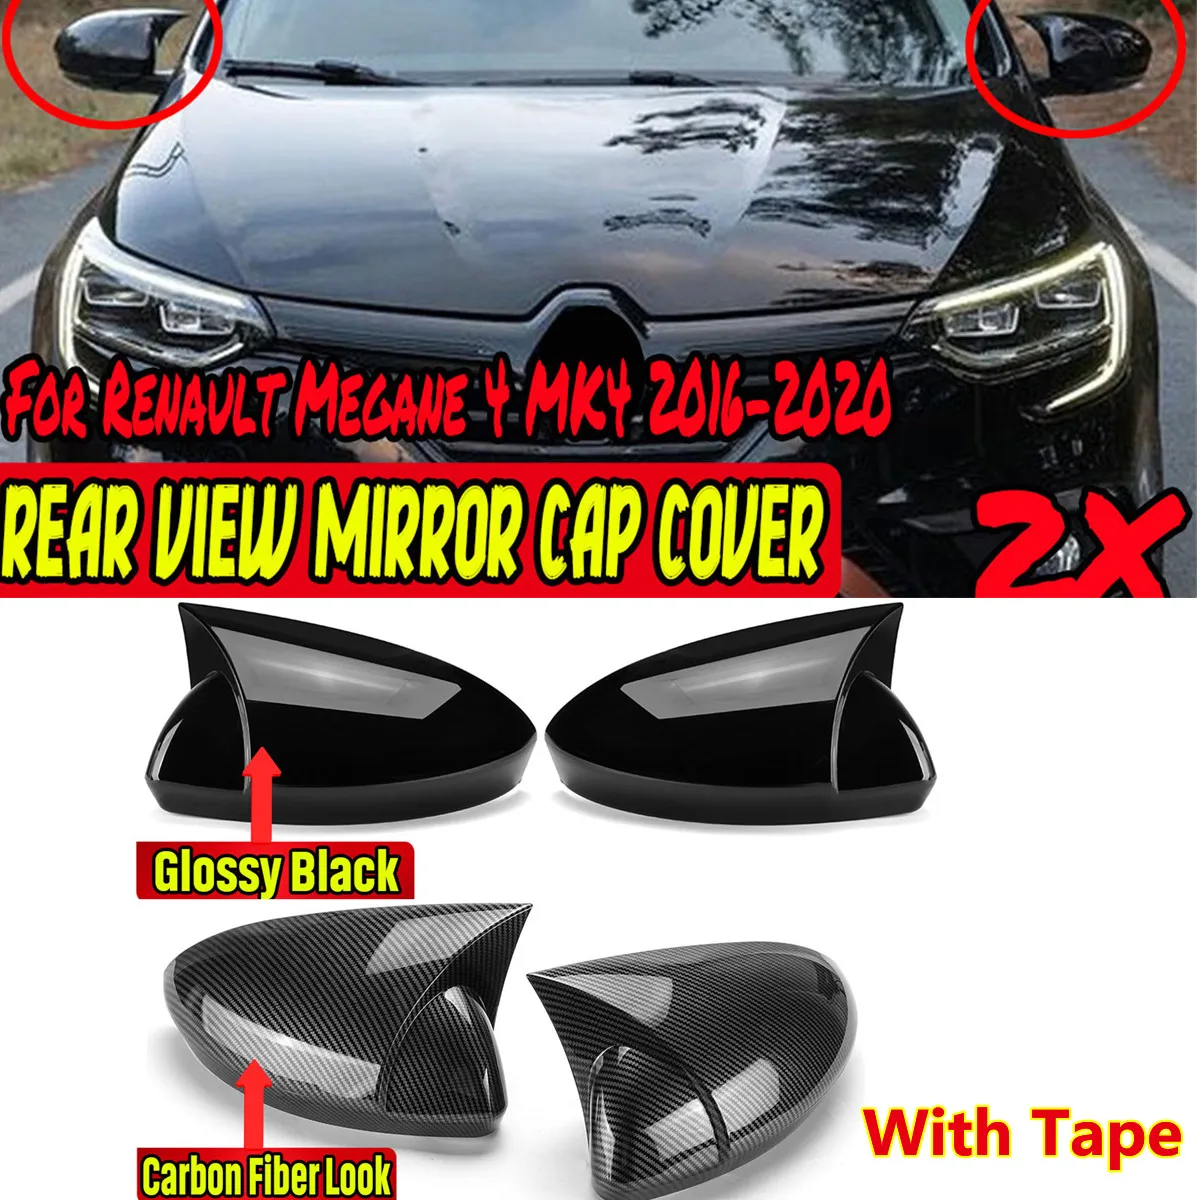 

Glossy Black/Carbon Fiber Car Side Wing Rearview Mirror Cover Cap For Renault Megane 4 MK4 2016-2020 Bat Rear View Mirror Cover